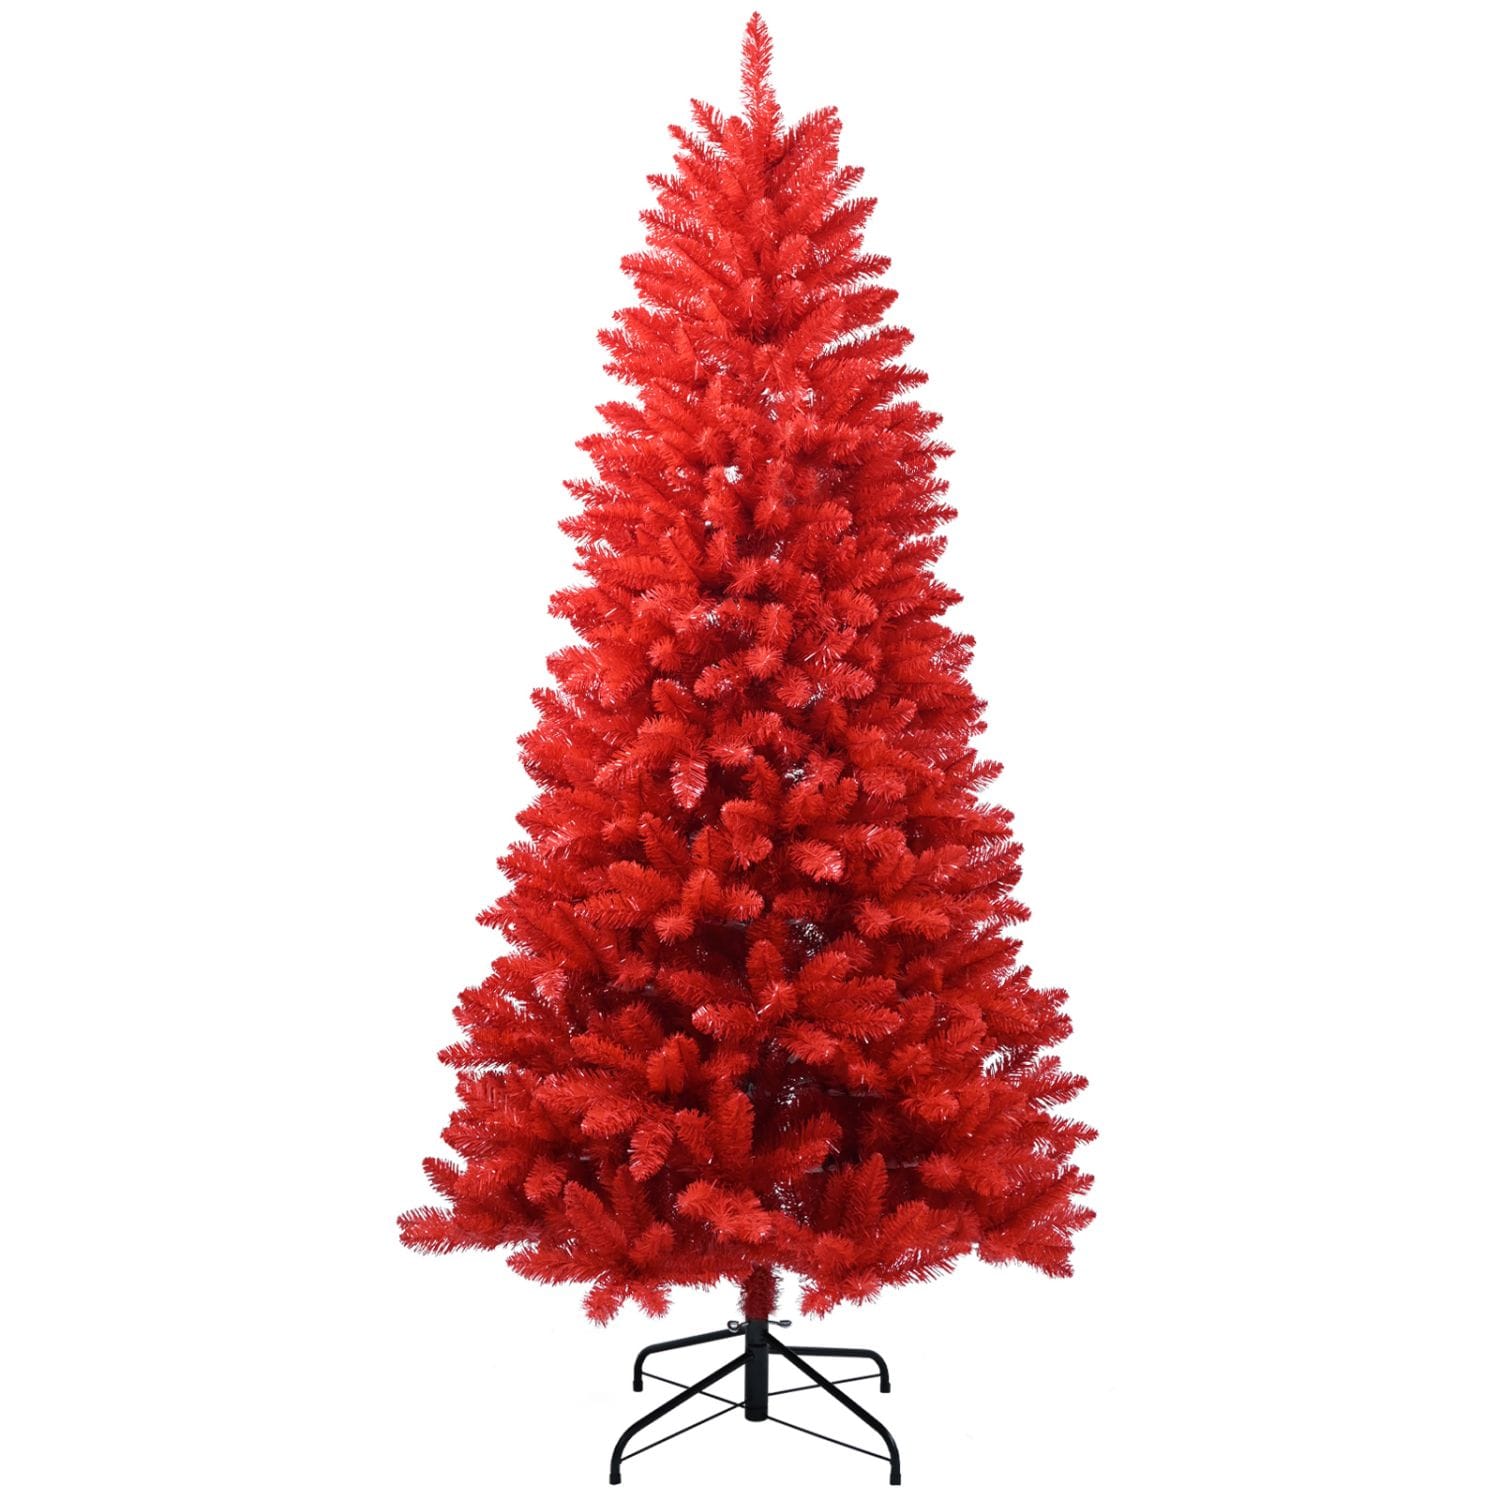 WELLFOR 6-ft Red Artificial Christmas Tree - Full Shape, PVC Branches,  Indoor/Outdoor Use in the Artificial Christmas Trees department at